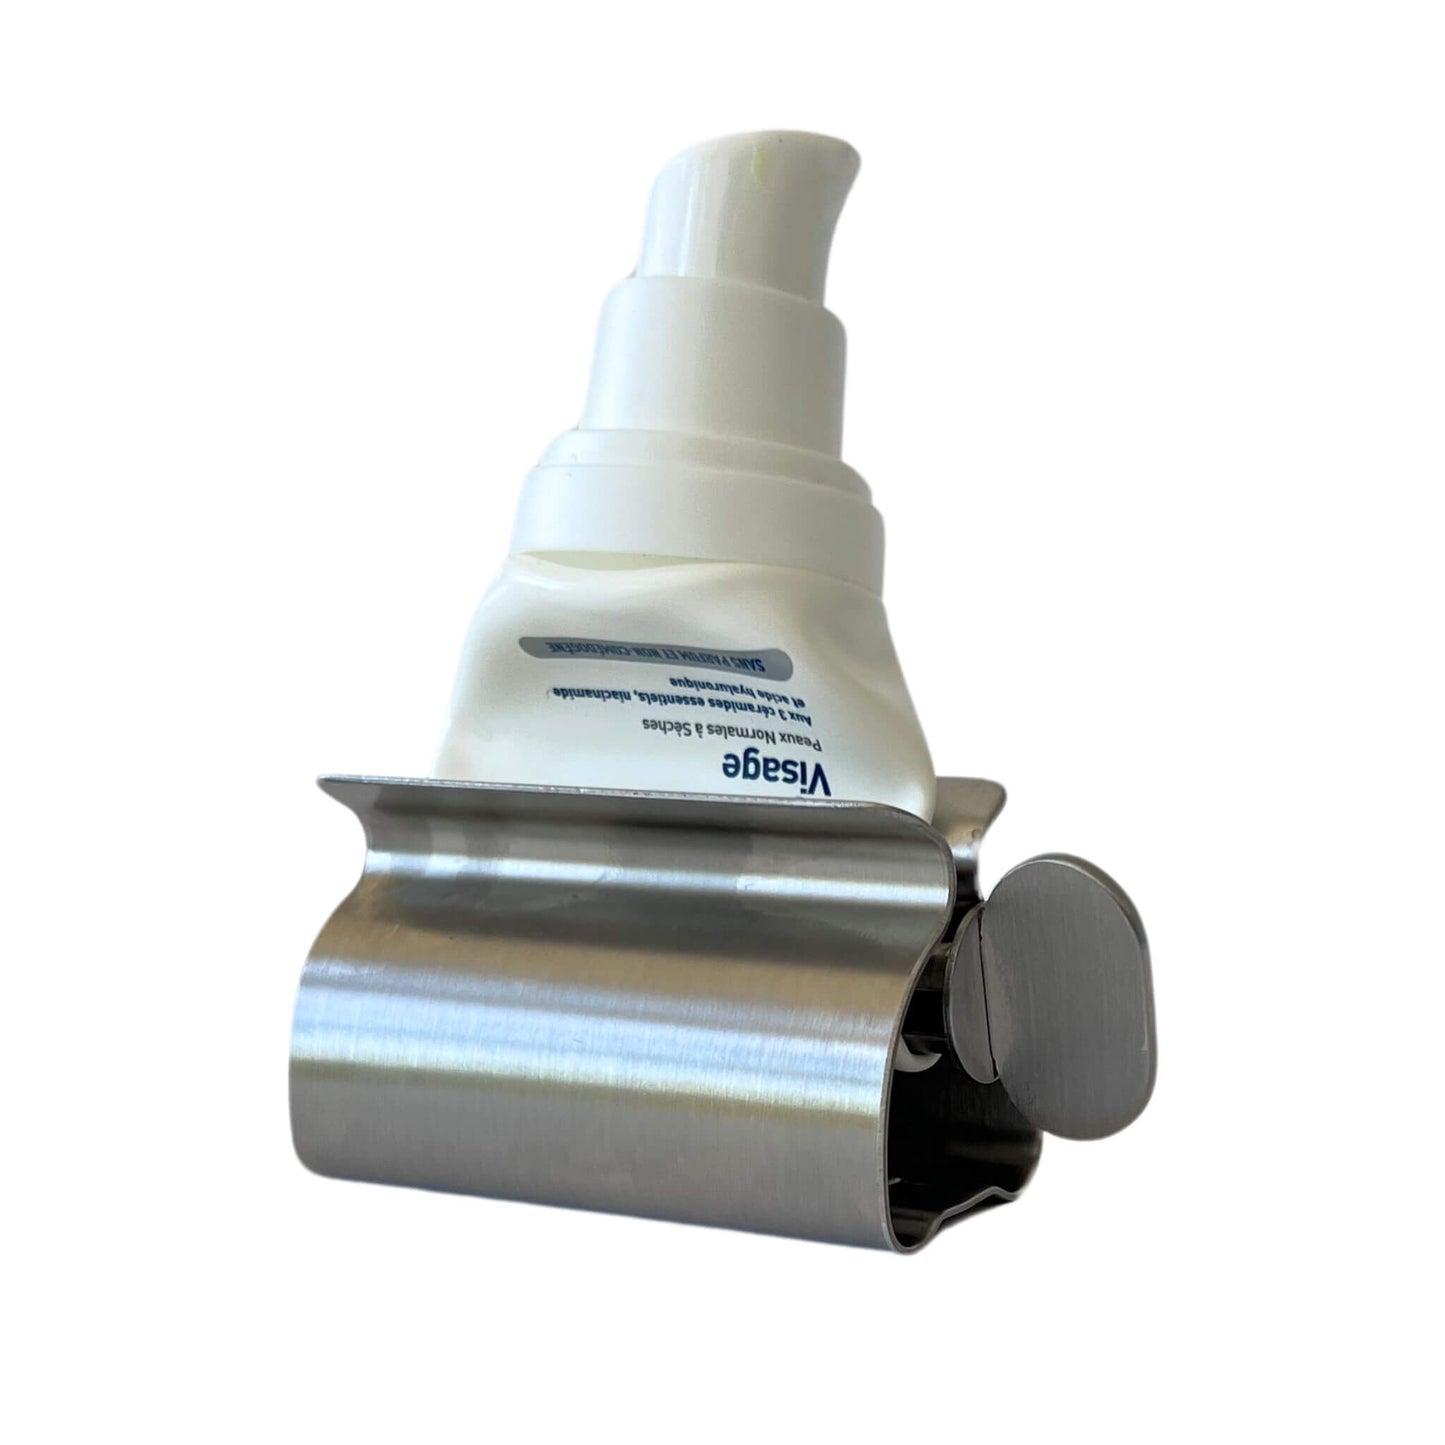 stainless steel tube squeezer with tube